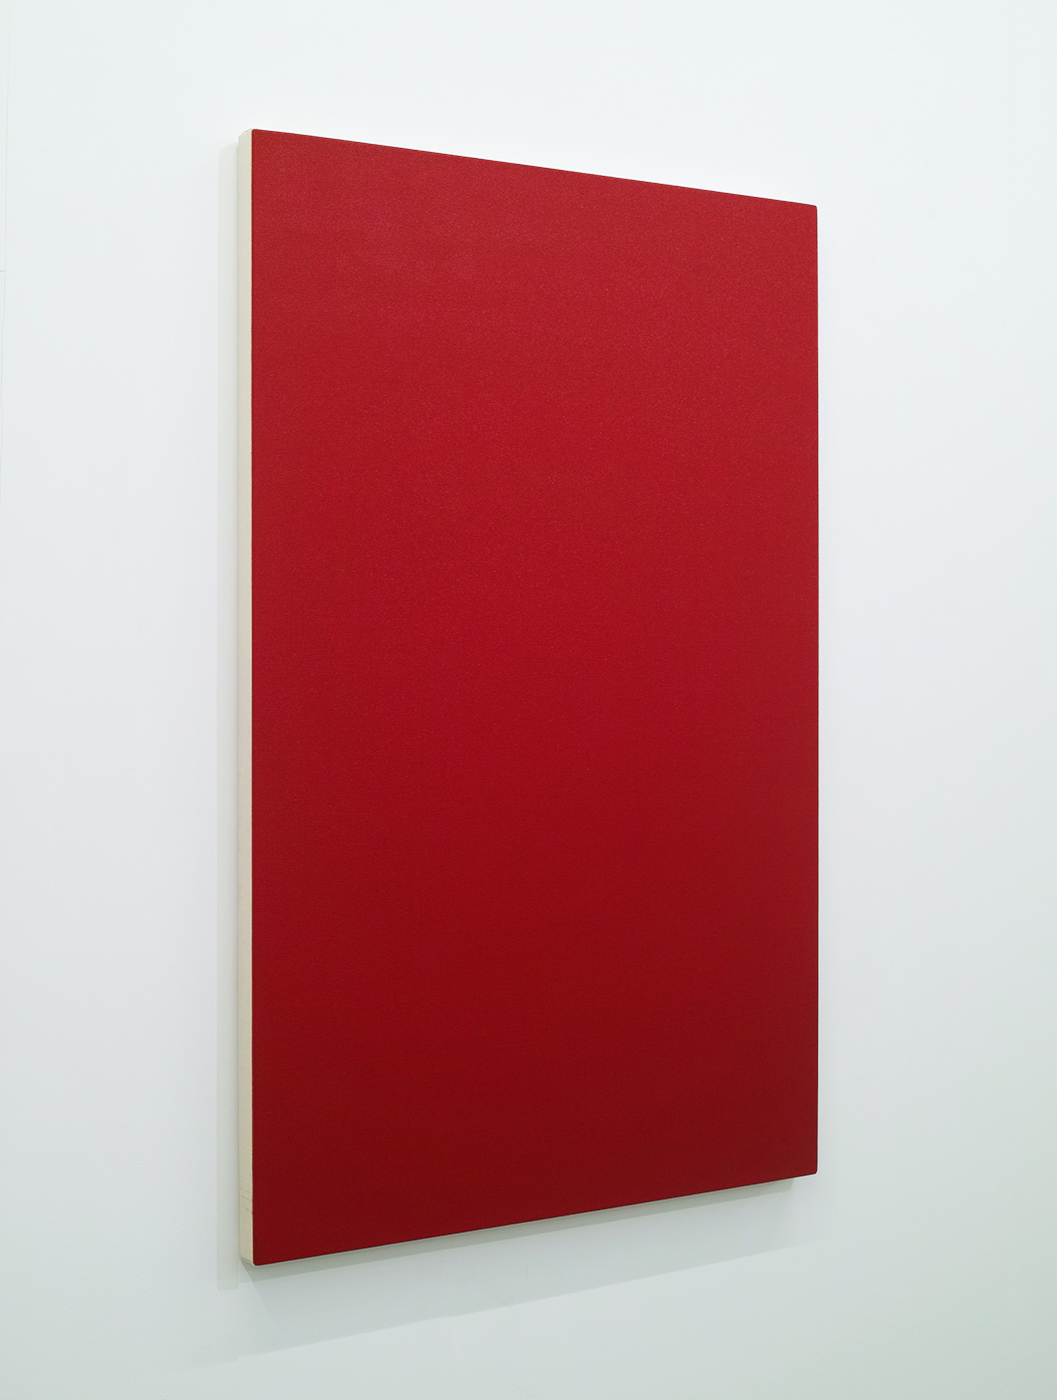 Text No. 582 (untitled red)｜acrylic, ink on canvas｜1310 x 805 x 45 mm｜2006<br>¥500,000 - 1,500,000